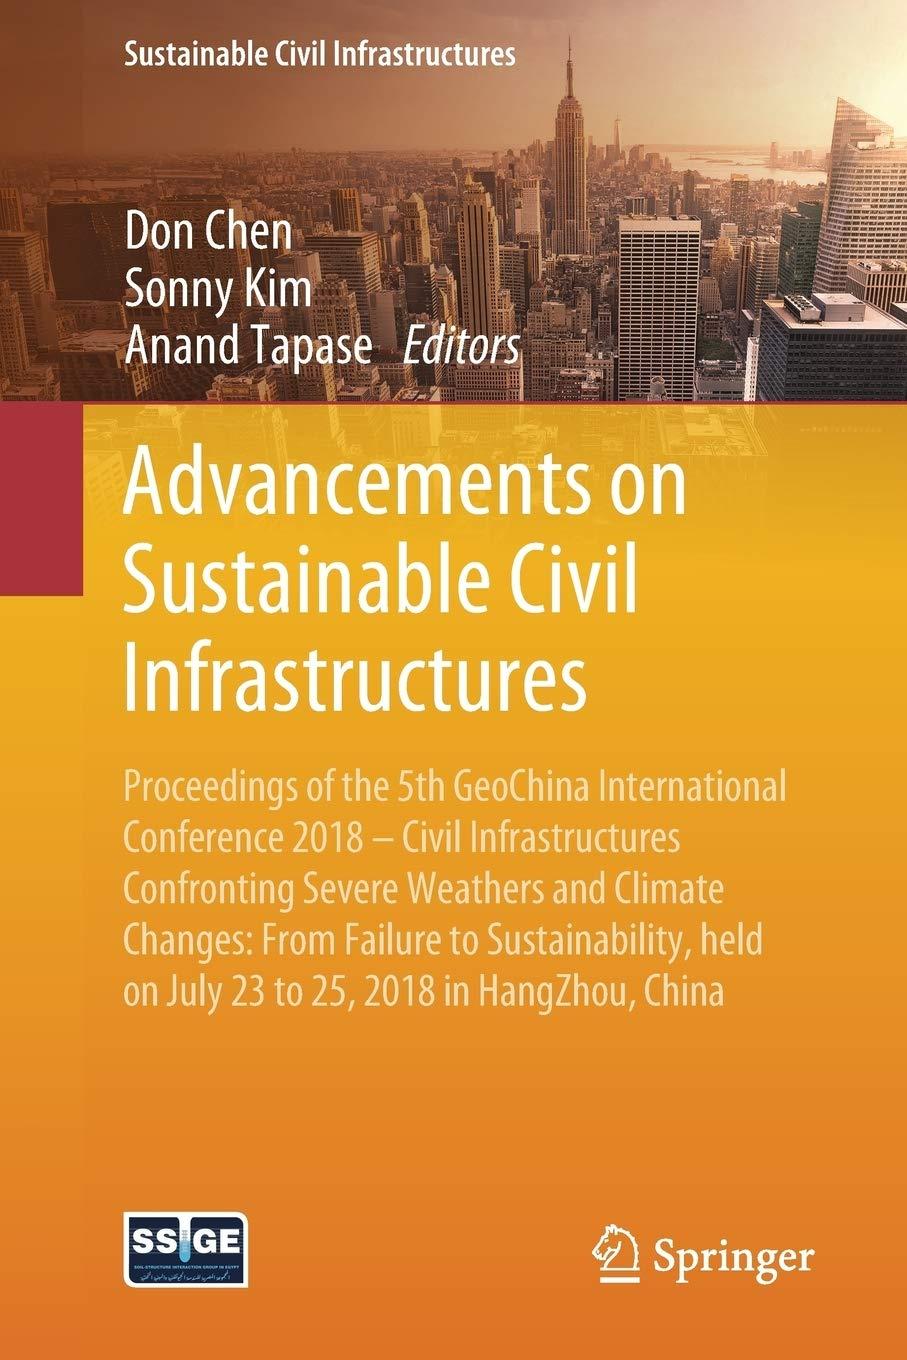 Advancements On Sustainable Civil Infrastructures Proceedings Of The 5th GeoChina International Conference 2018 Civil Infrastructures Confronting ... On July 23 To 25, 2018 In HangZhou, China